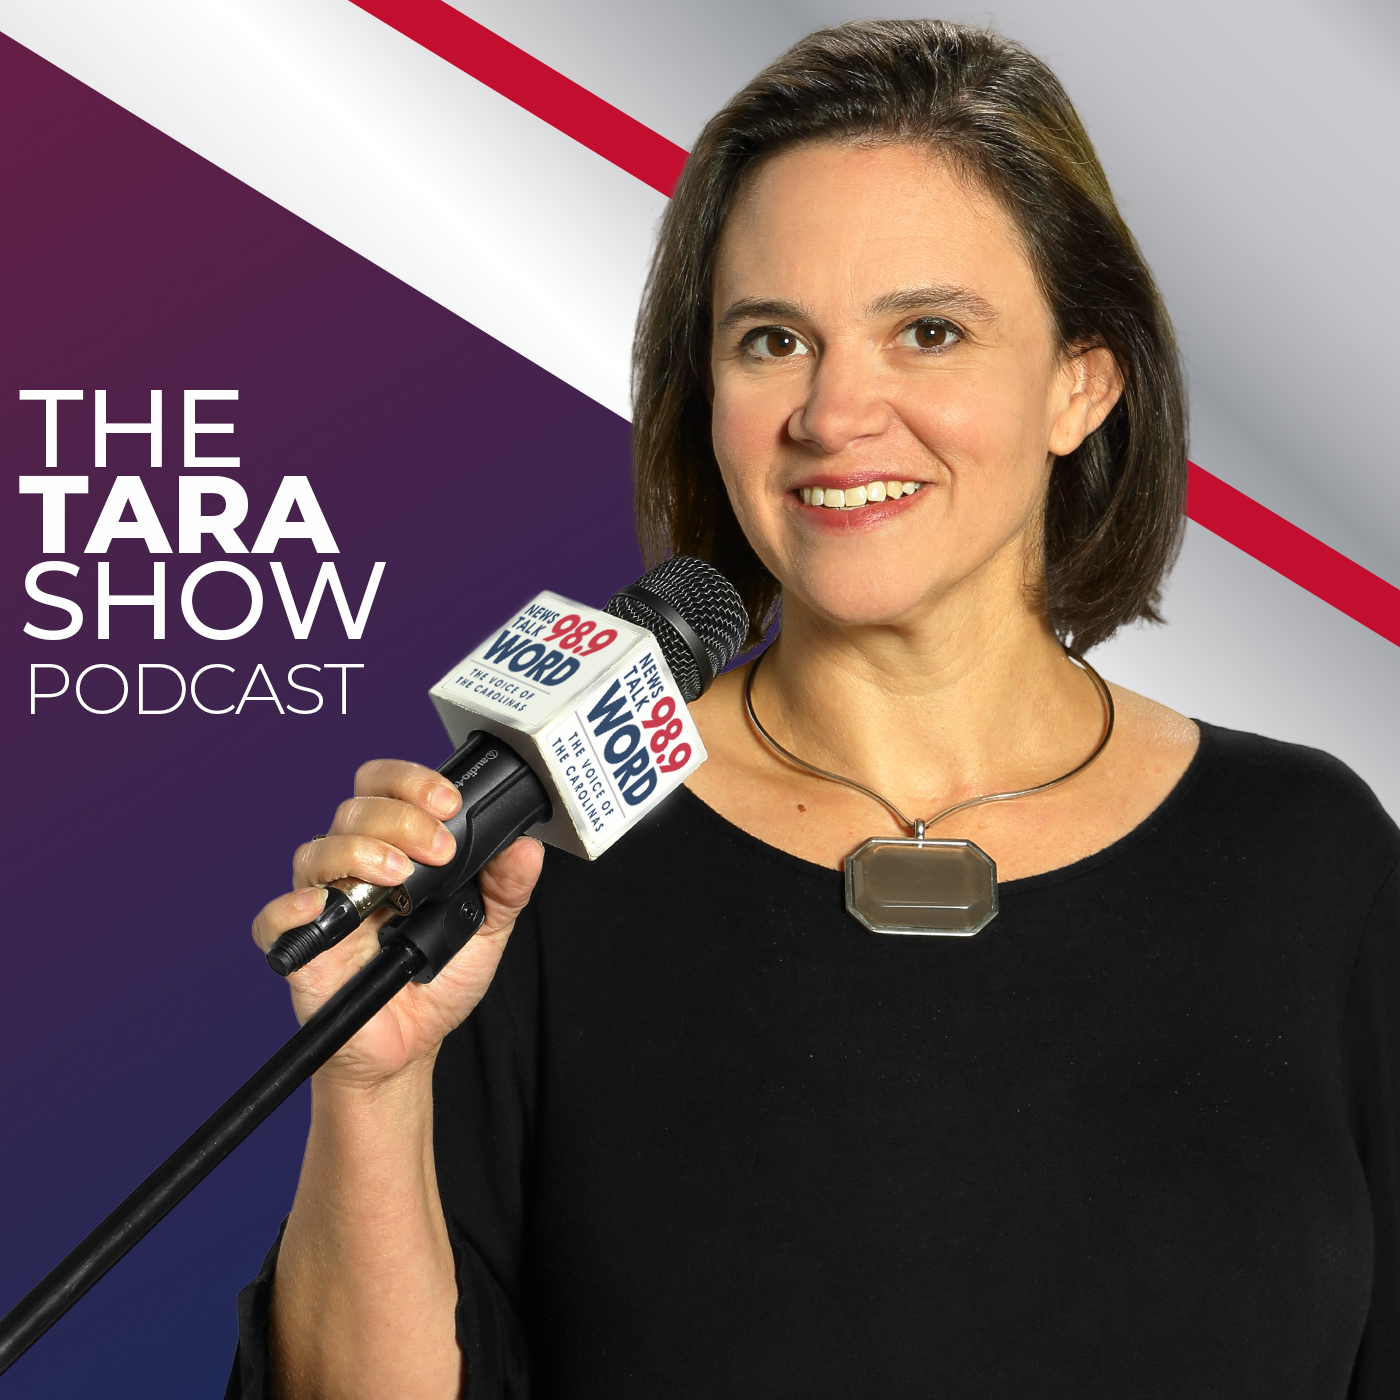 Hour 4: The Tara Show - “The Destruction of the Jewish People” “Accepting Hamas Refugees” “The Outrageous Trump Trials” “Teachers Forbidden Fruit”